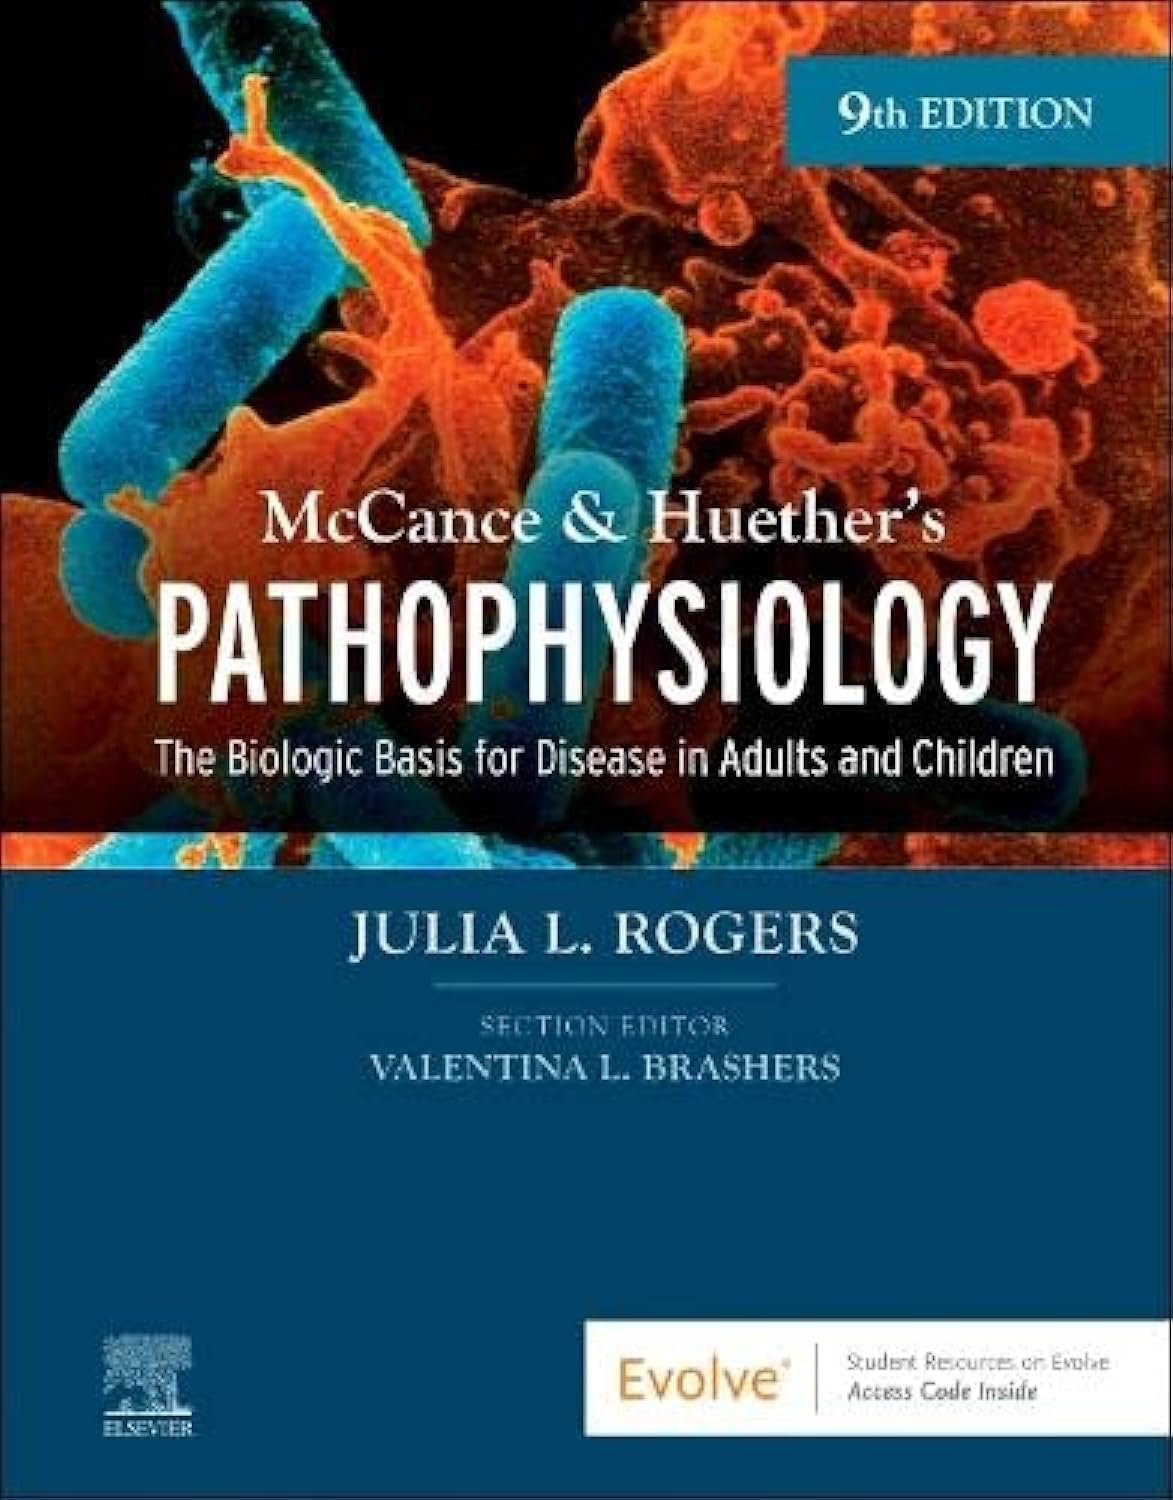 McCance ＆amp; Huether s Pathophysiology: The Biologic Basis for Disease in Adults and Children, 9th Edition by Julia Rogers DNP RN CNS FNP-BC 